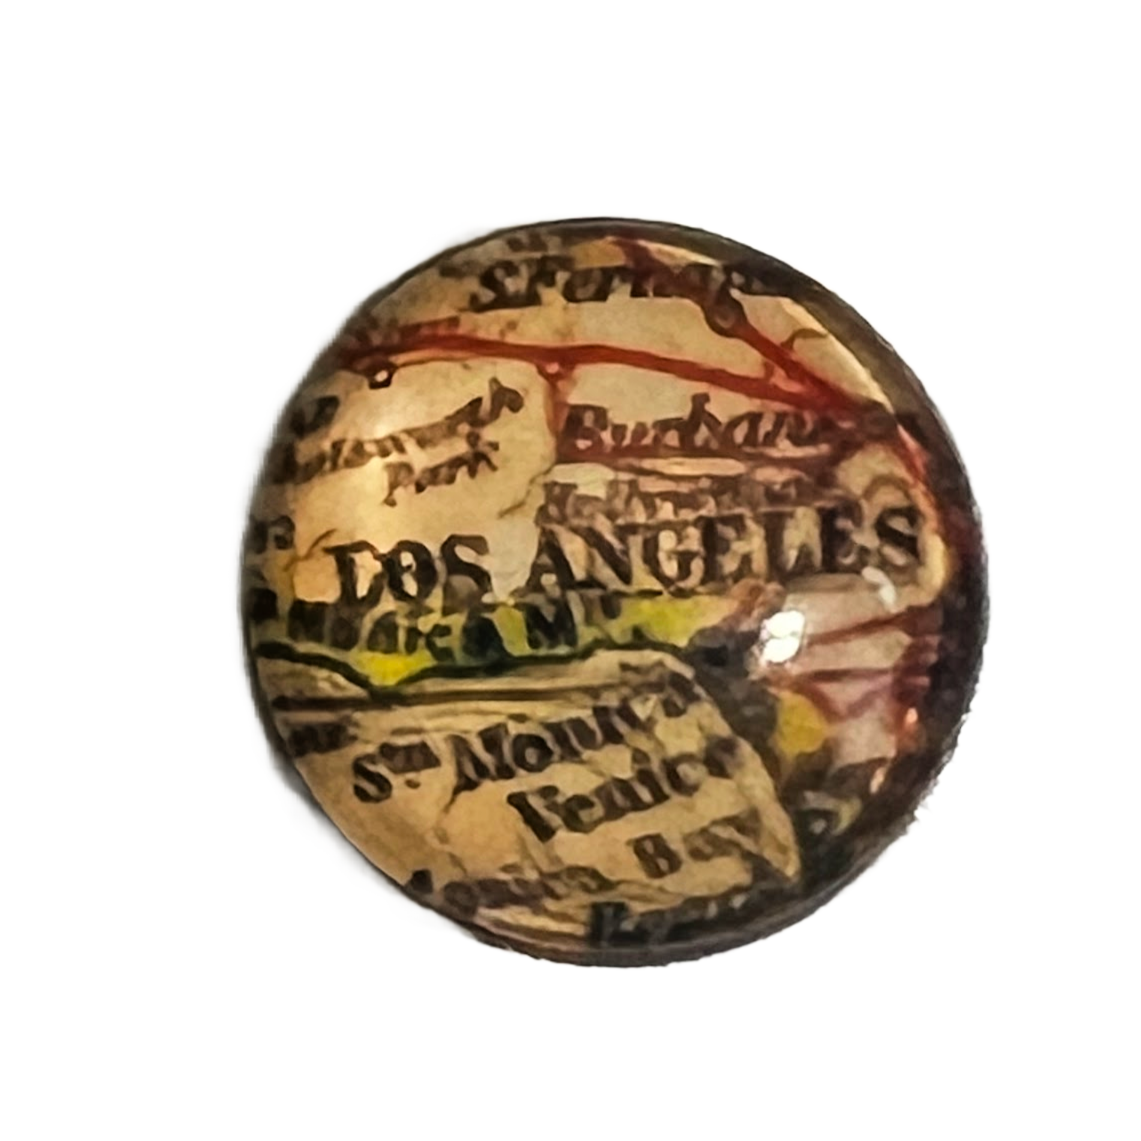 Antique Globe/Map Snap Collection 18mm Snap Charms (12 Designs)